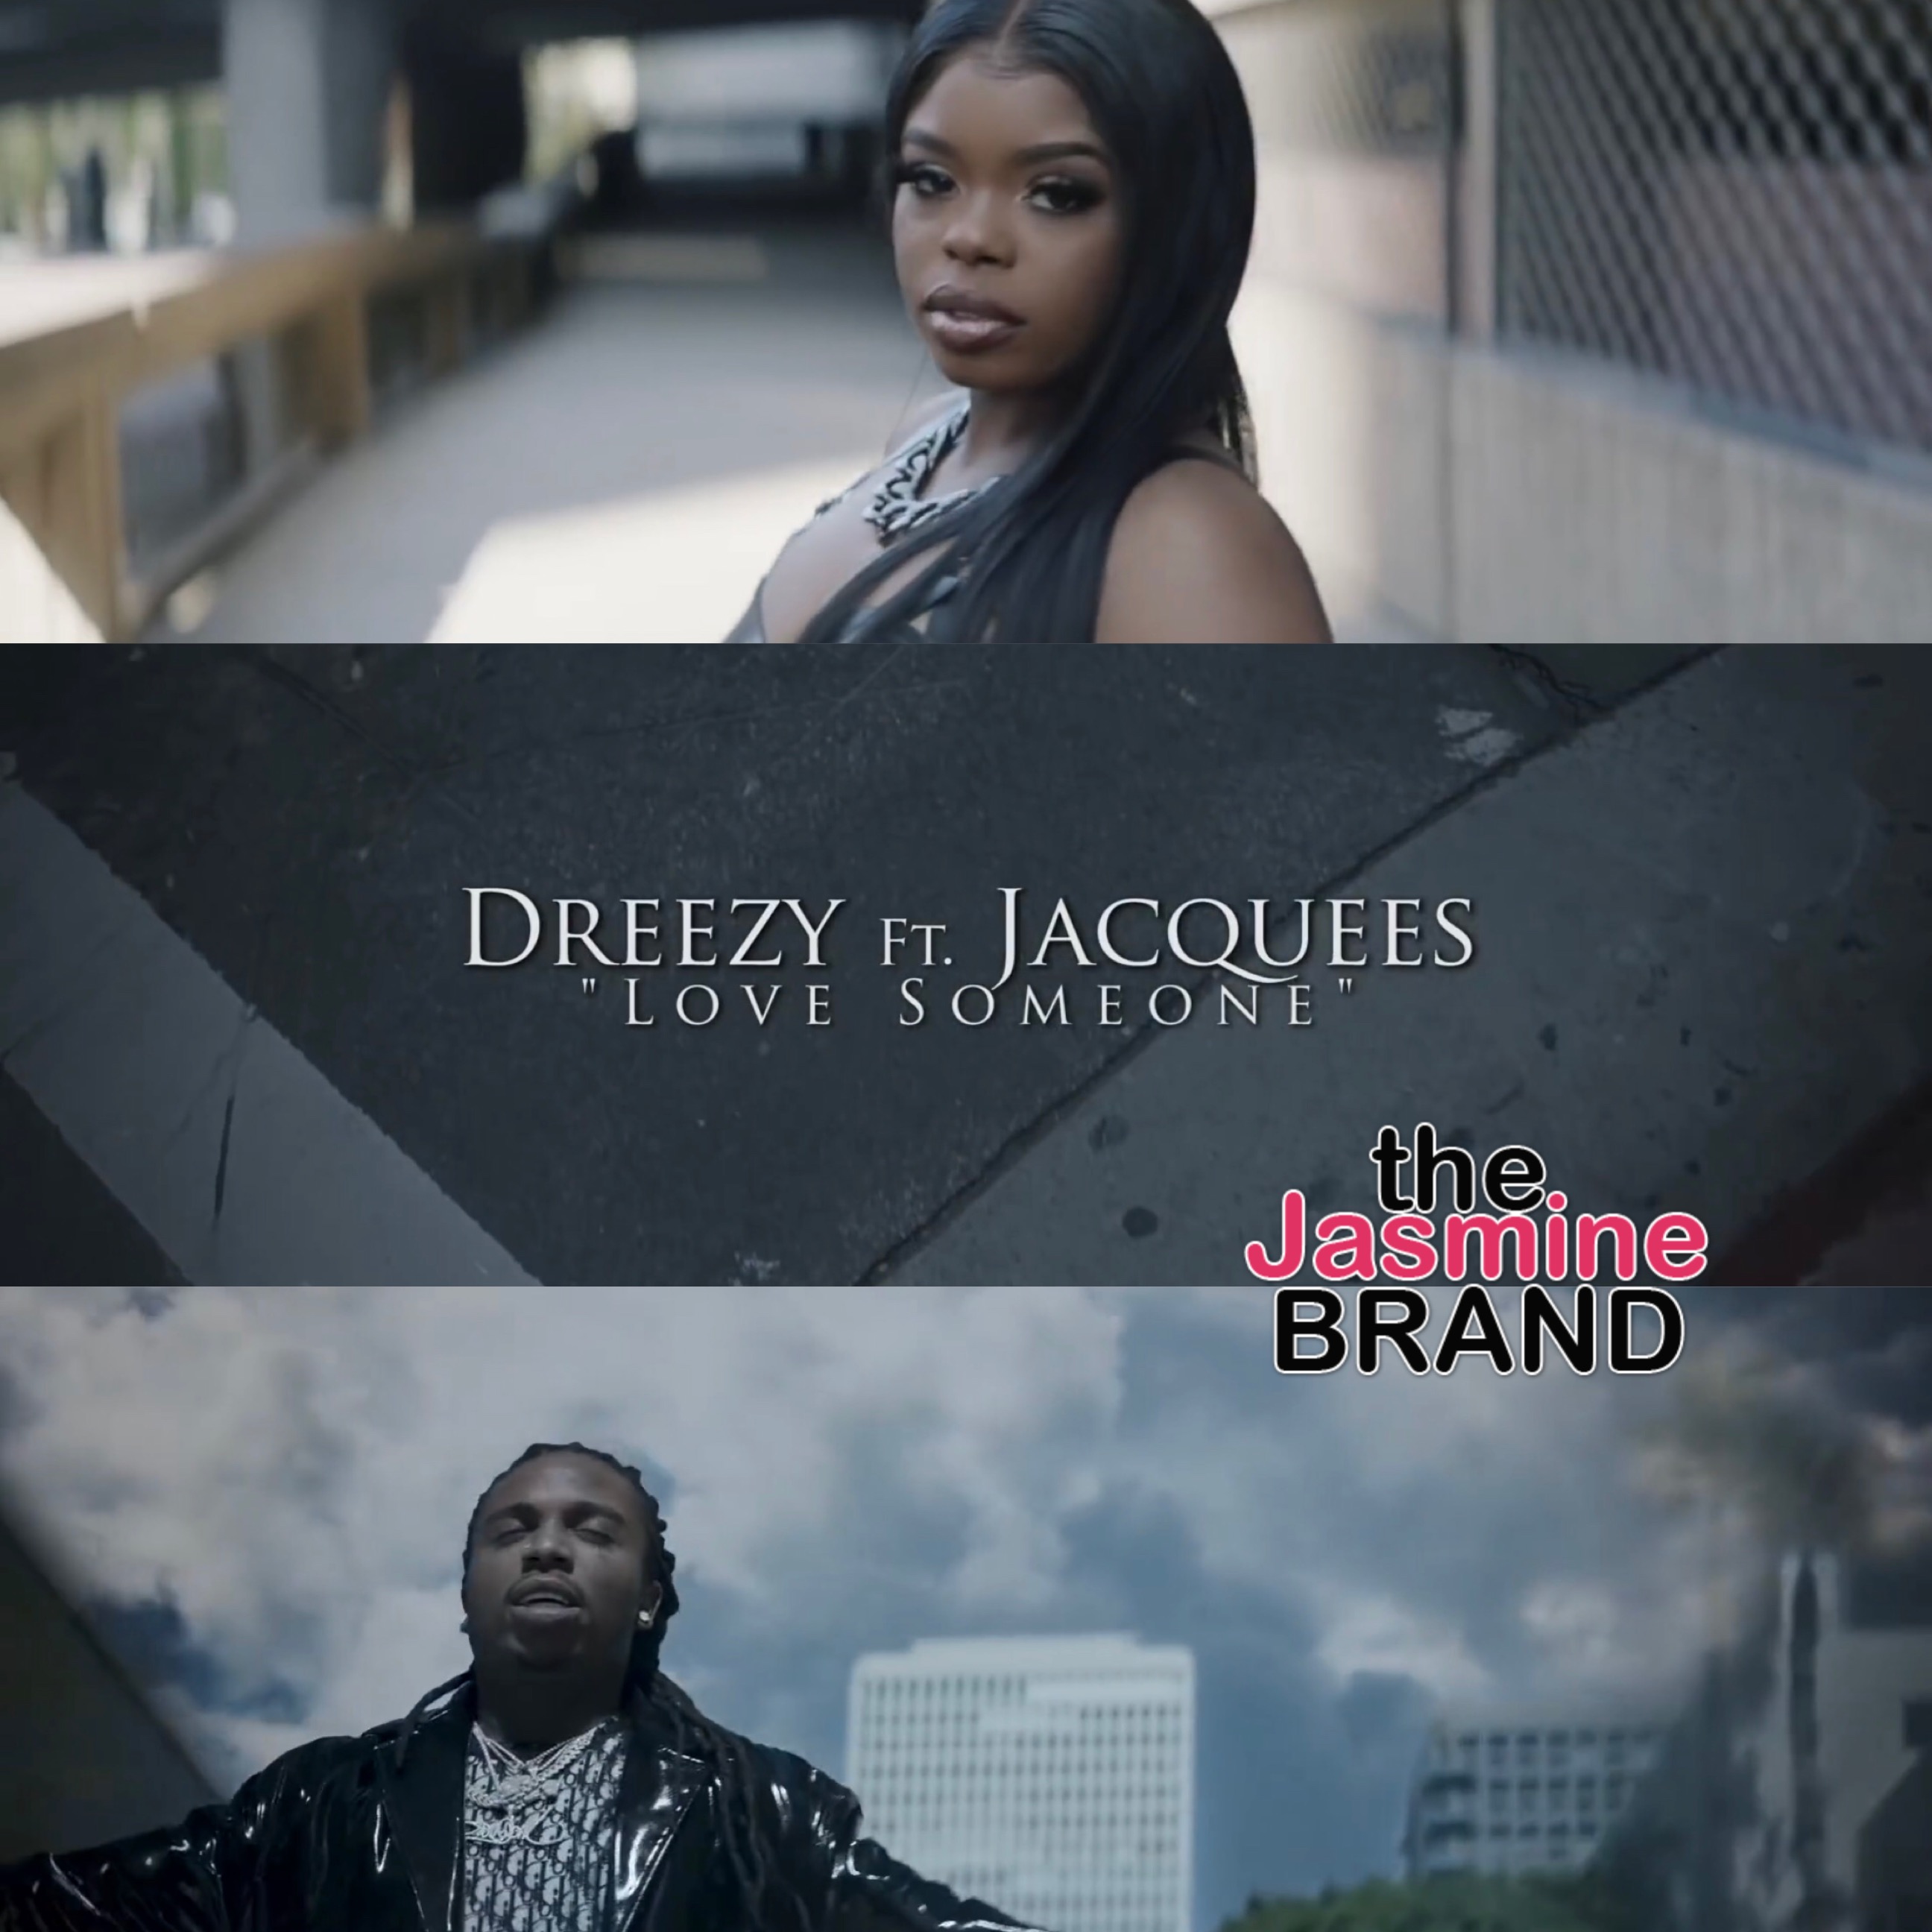 jacquees 5 steps video